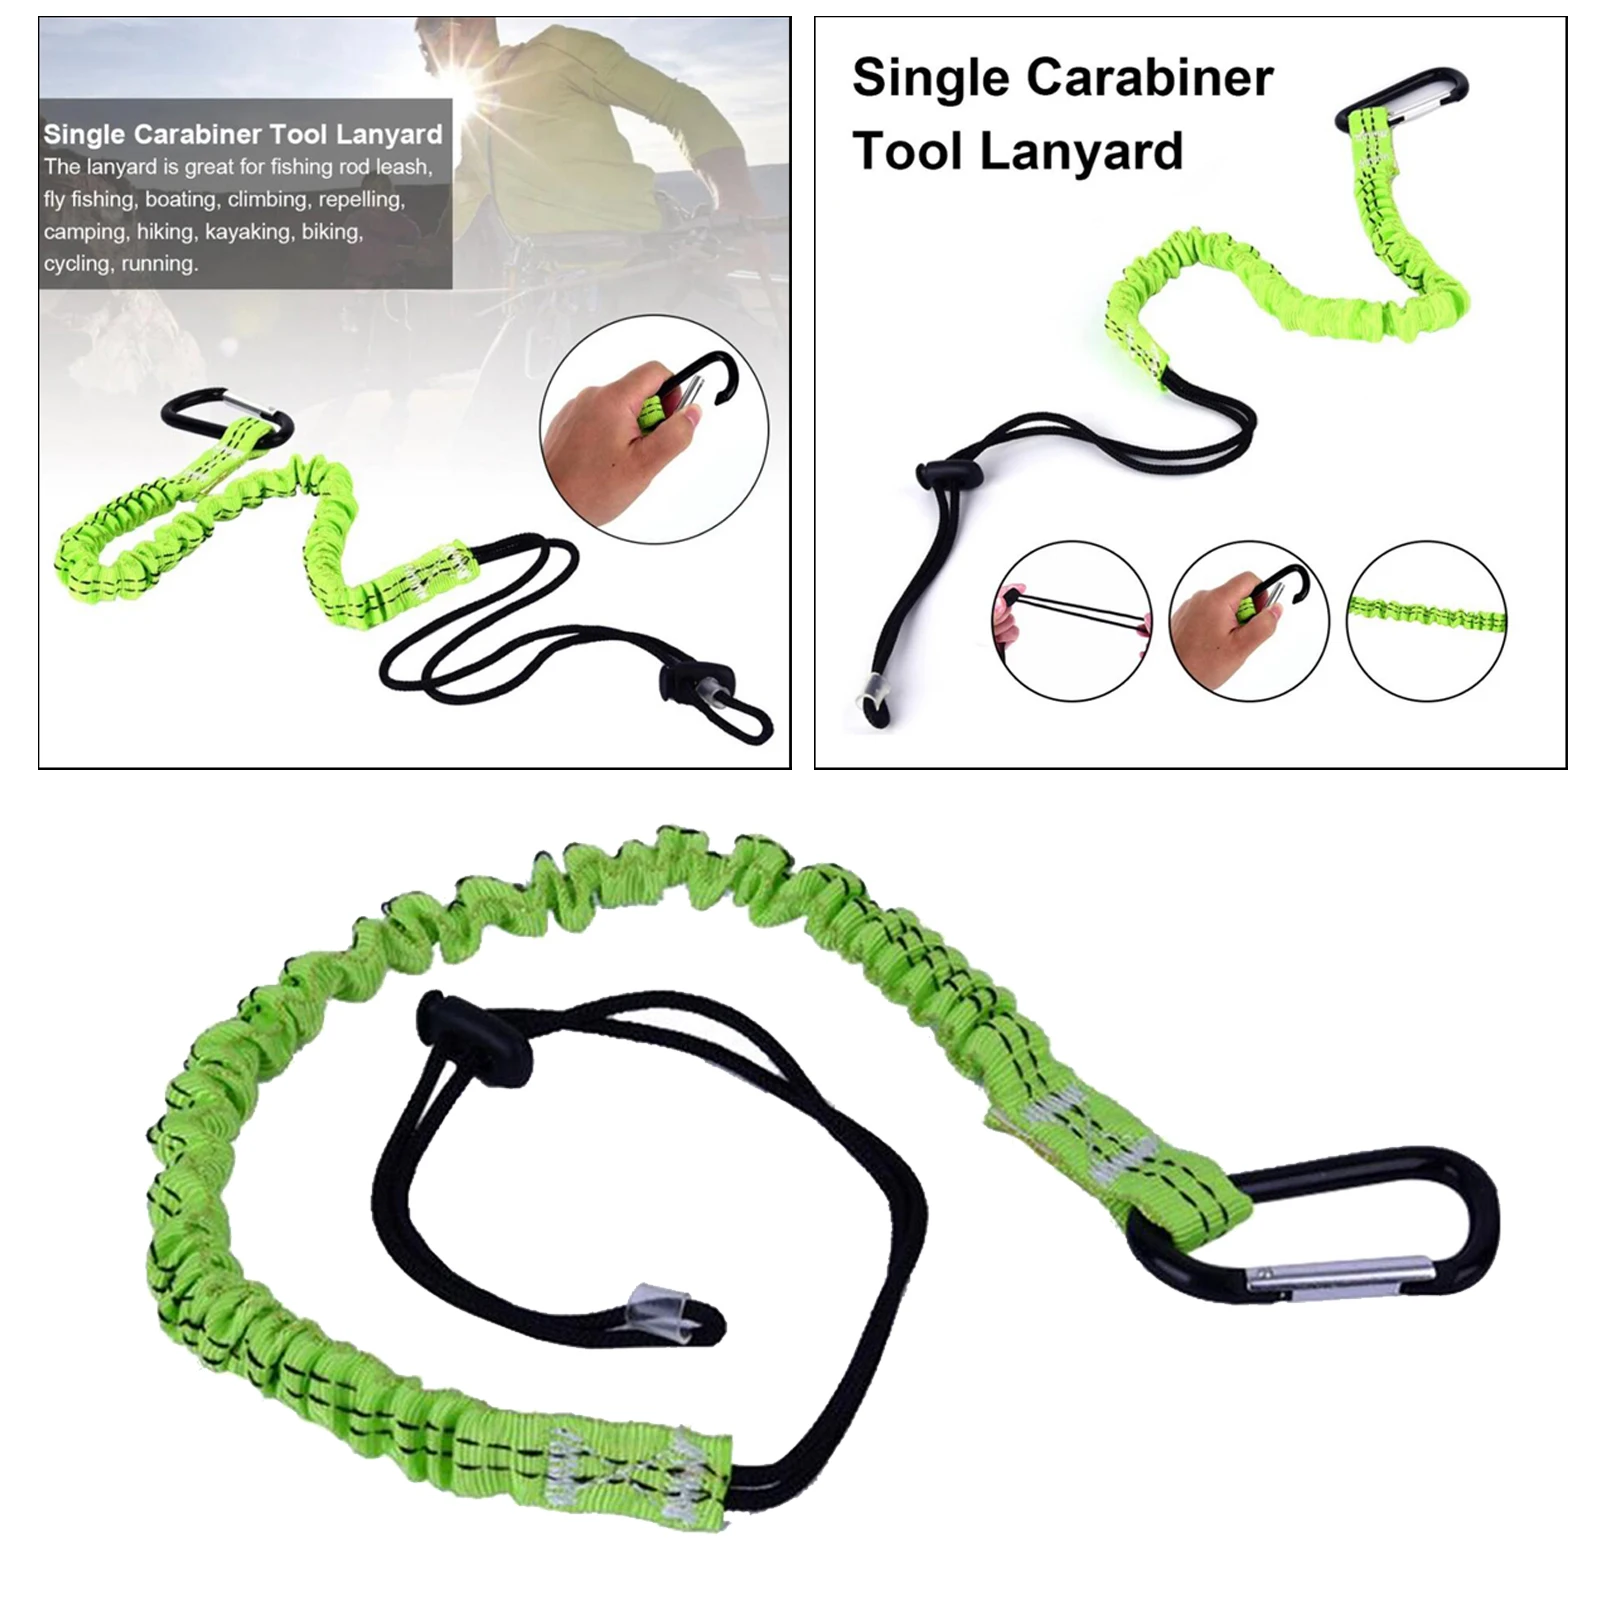 

Single Carabiner Lanyard Safety Rock Climbing Escape Emergency Rope Outdoor Caving Fishing Exploration Mountaineering Equipment